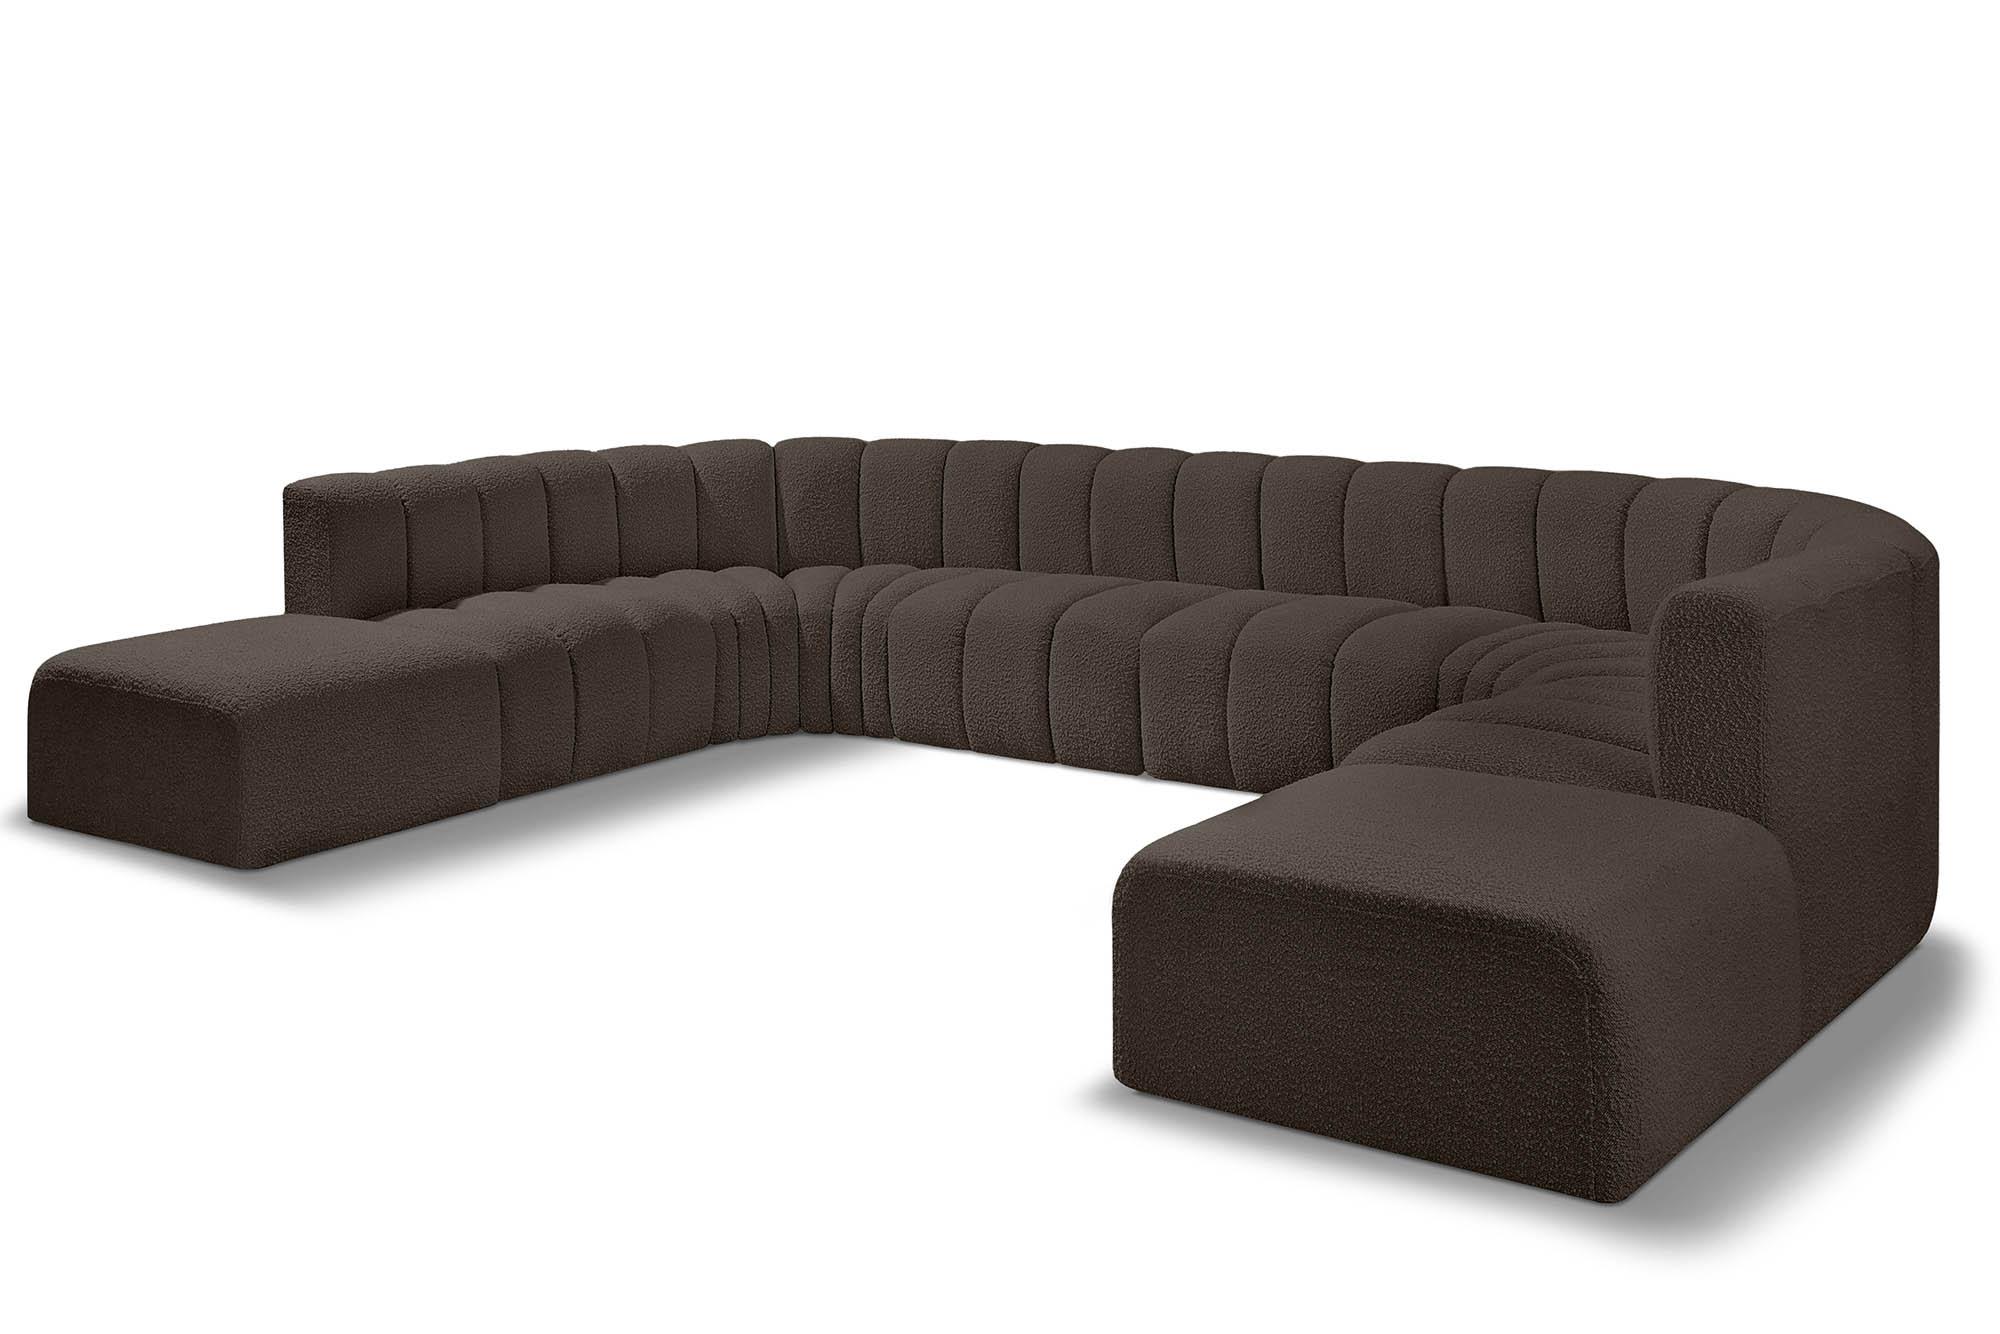 Contemporary, Modern Modular Sectional Sofa ARC 102Brown-S10A 102Brown-S10A in Brown 